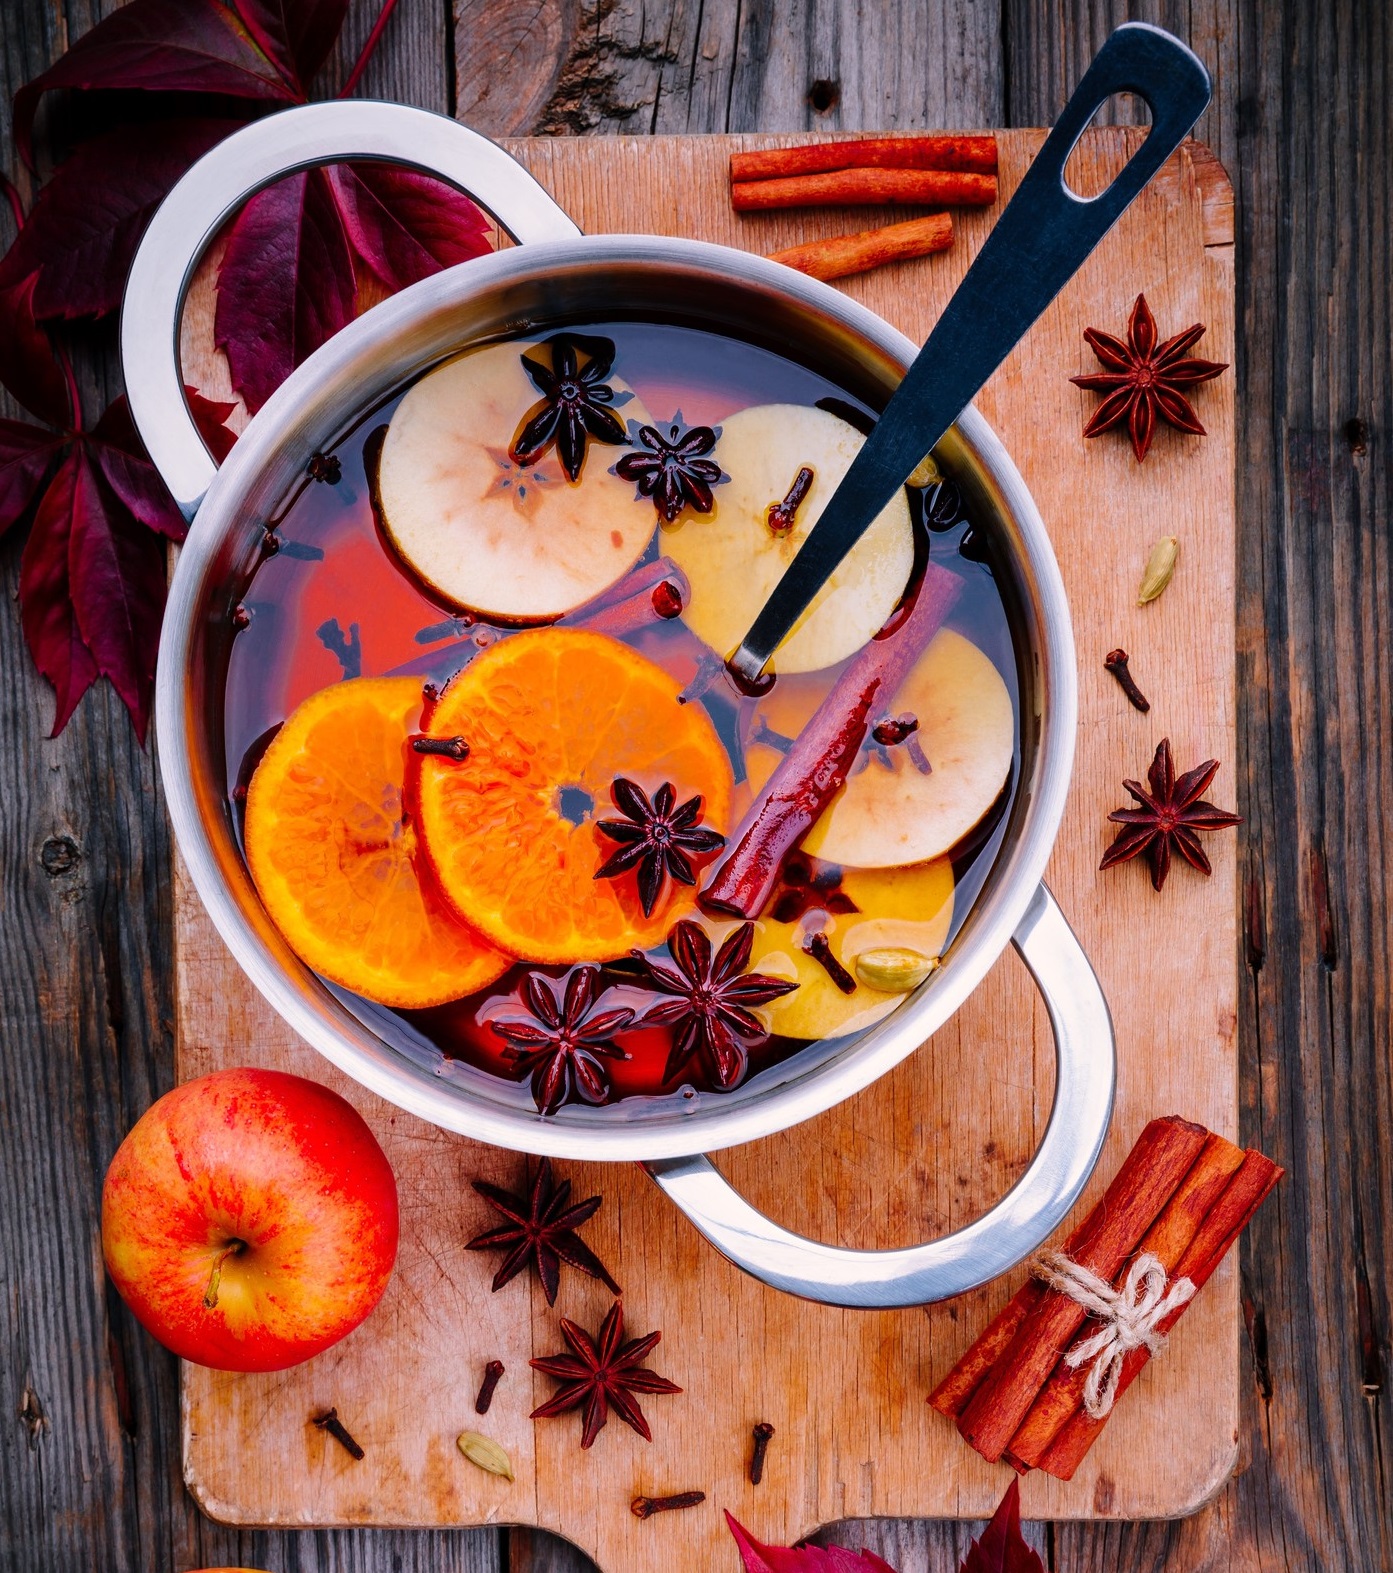 Hot mulled wine drink with citrus, apples, cinnamon sticks, cloves and anise in cooking pan on wooden background